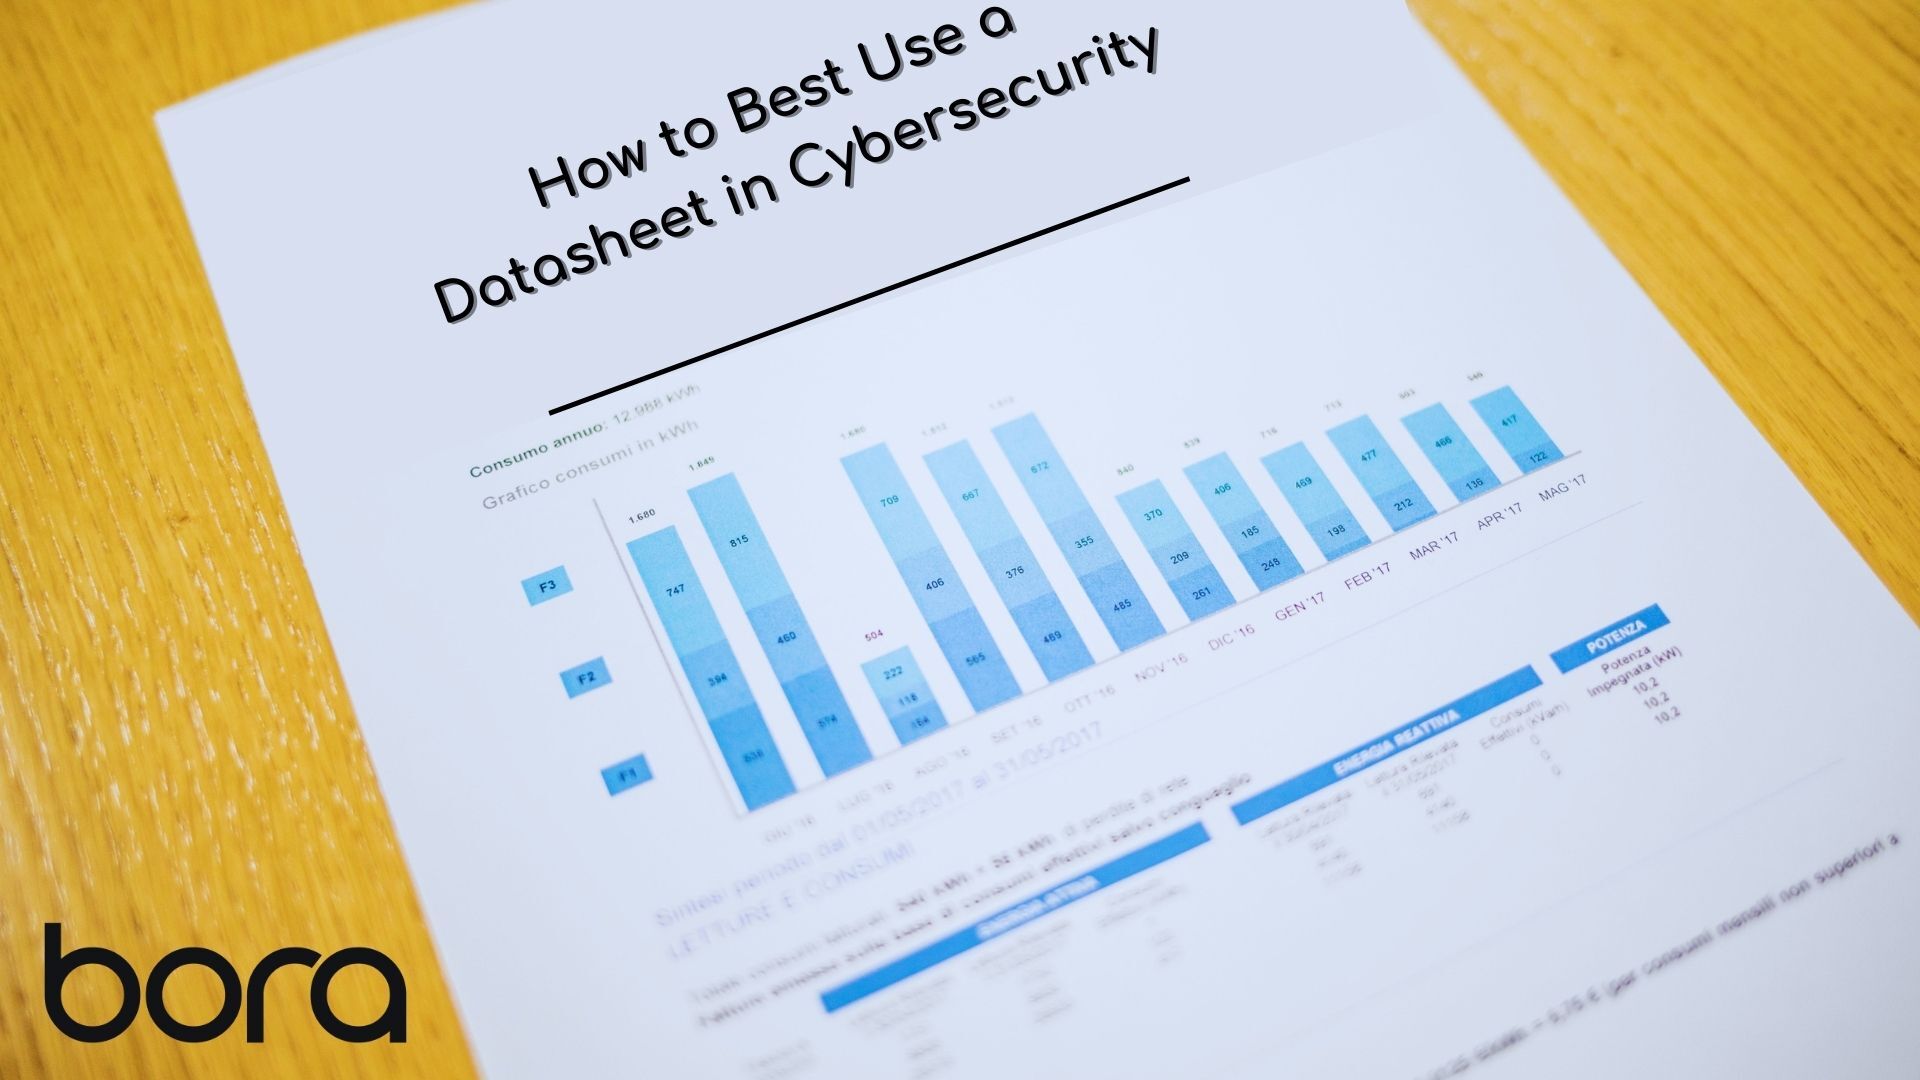 How to Best Use a Datasheet in Cybersecurity